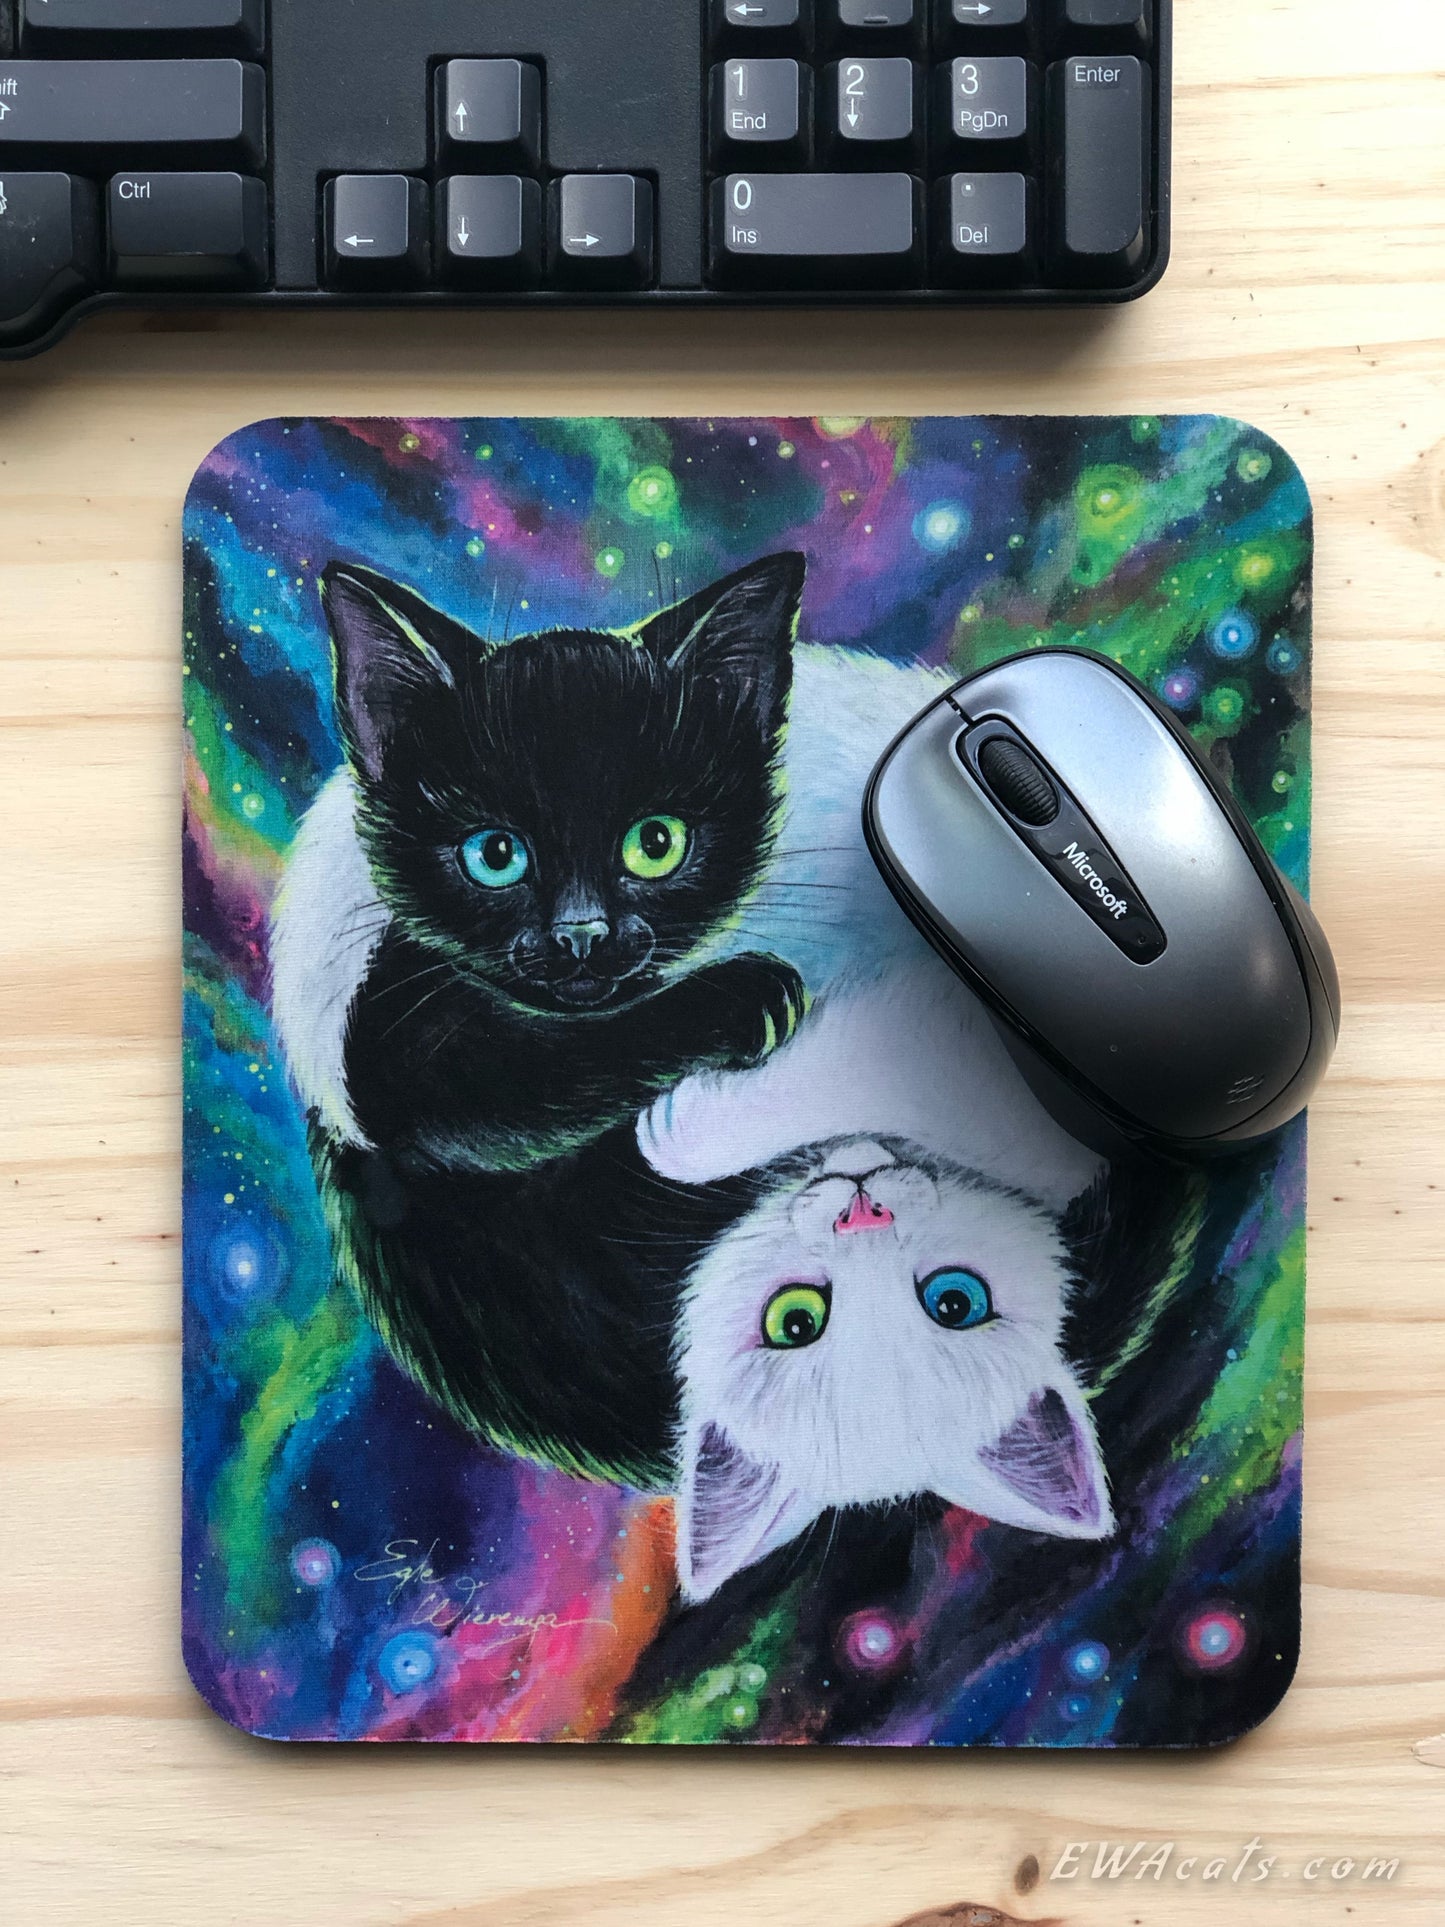 Mouse Pad "Purrfect Harmony"